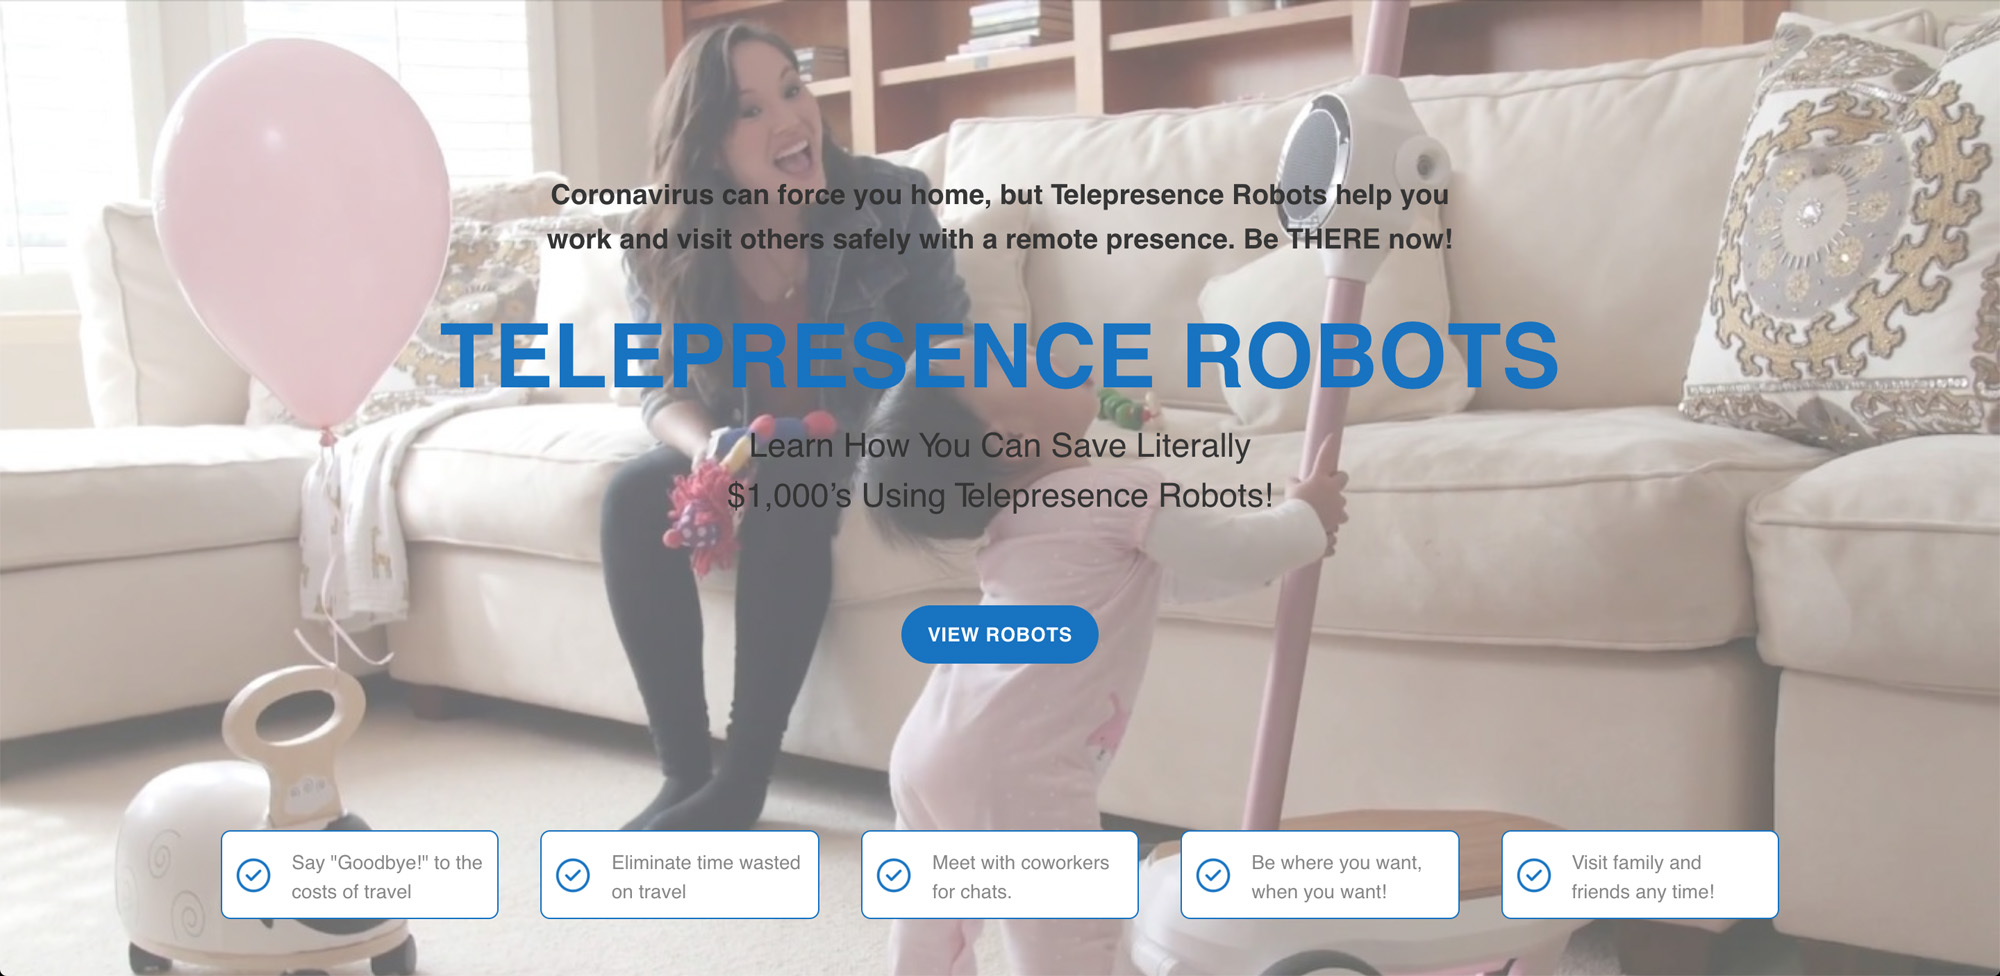 Screenshot of TelepresenceRobots.com’s homepage, displaying a woman on a couch speaking to a telepresence robot while her baby grabs onto the robot's body